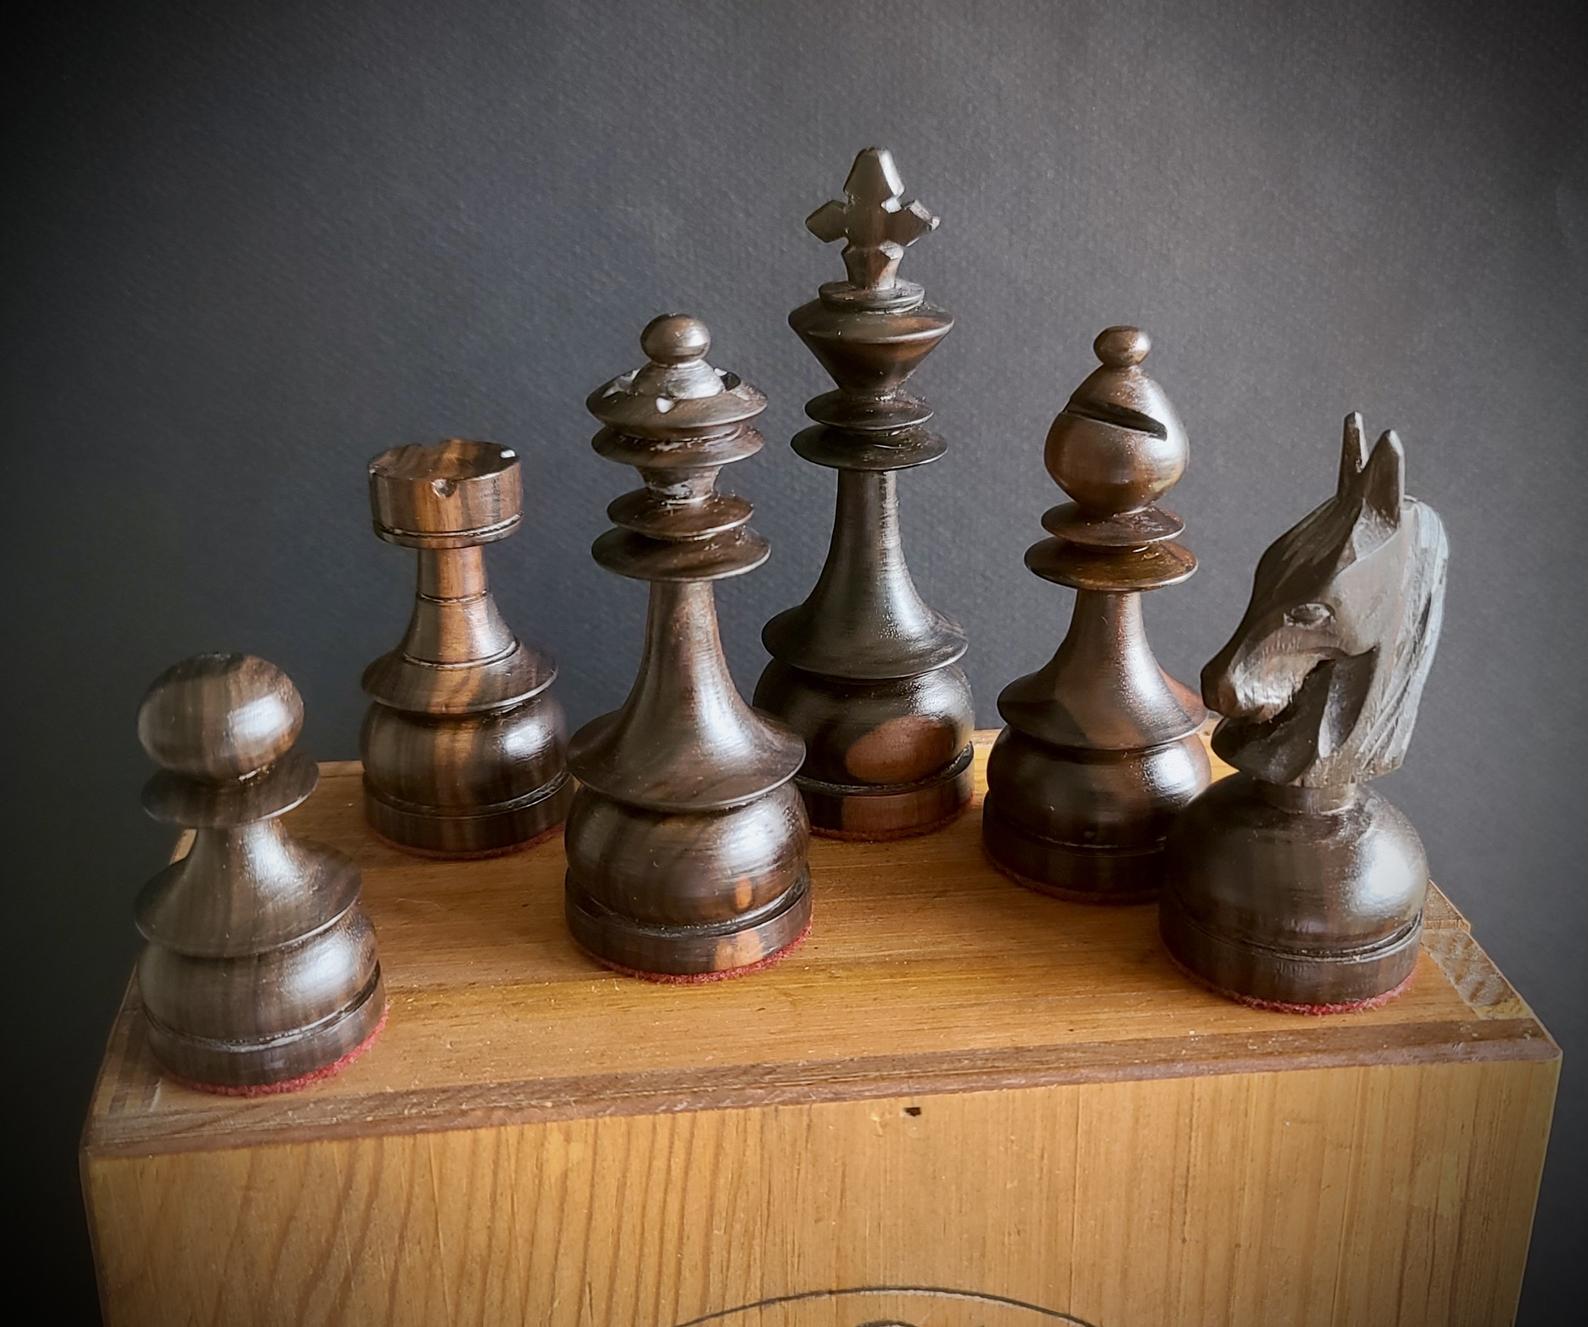 What Is The Most Powerful Piece In Chess? – Maroon Chess